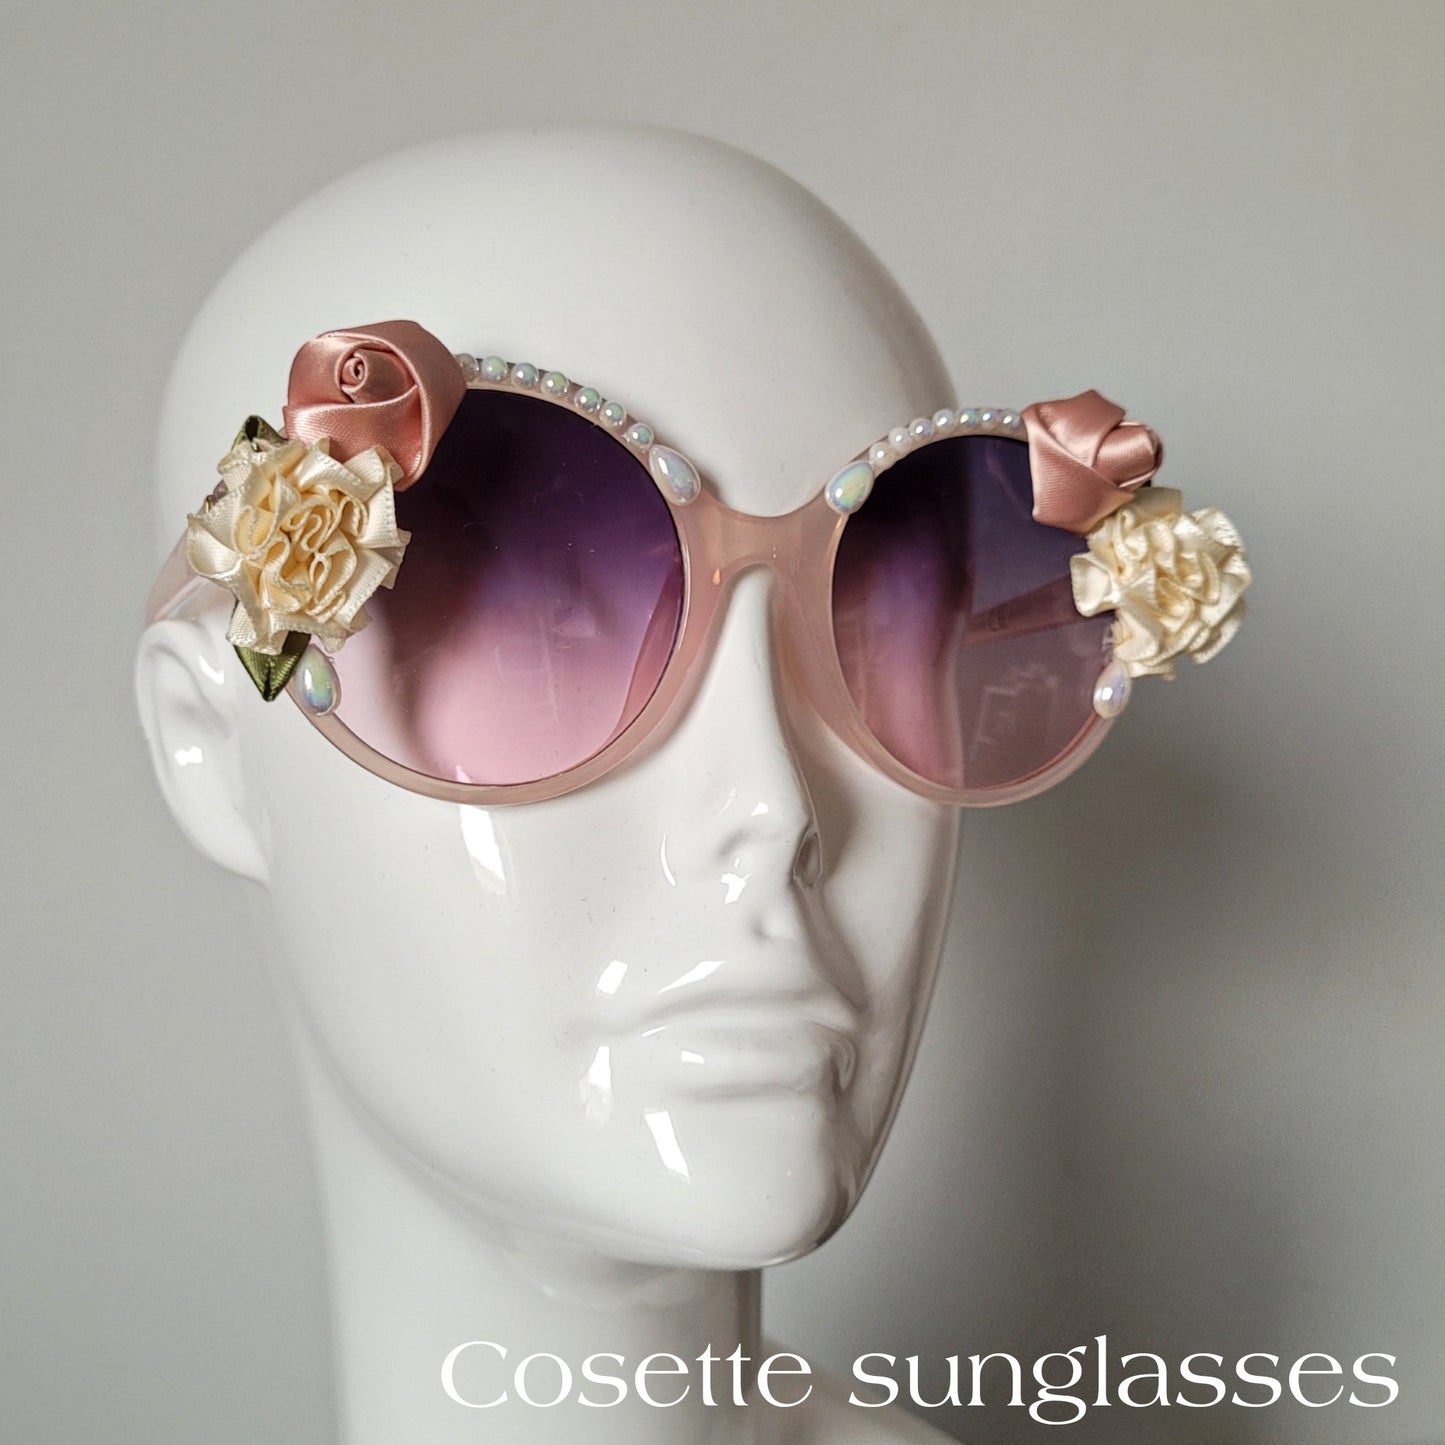 Á vallians coeurs riens impossible Collection: The Cosette sunglasses